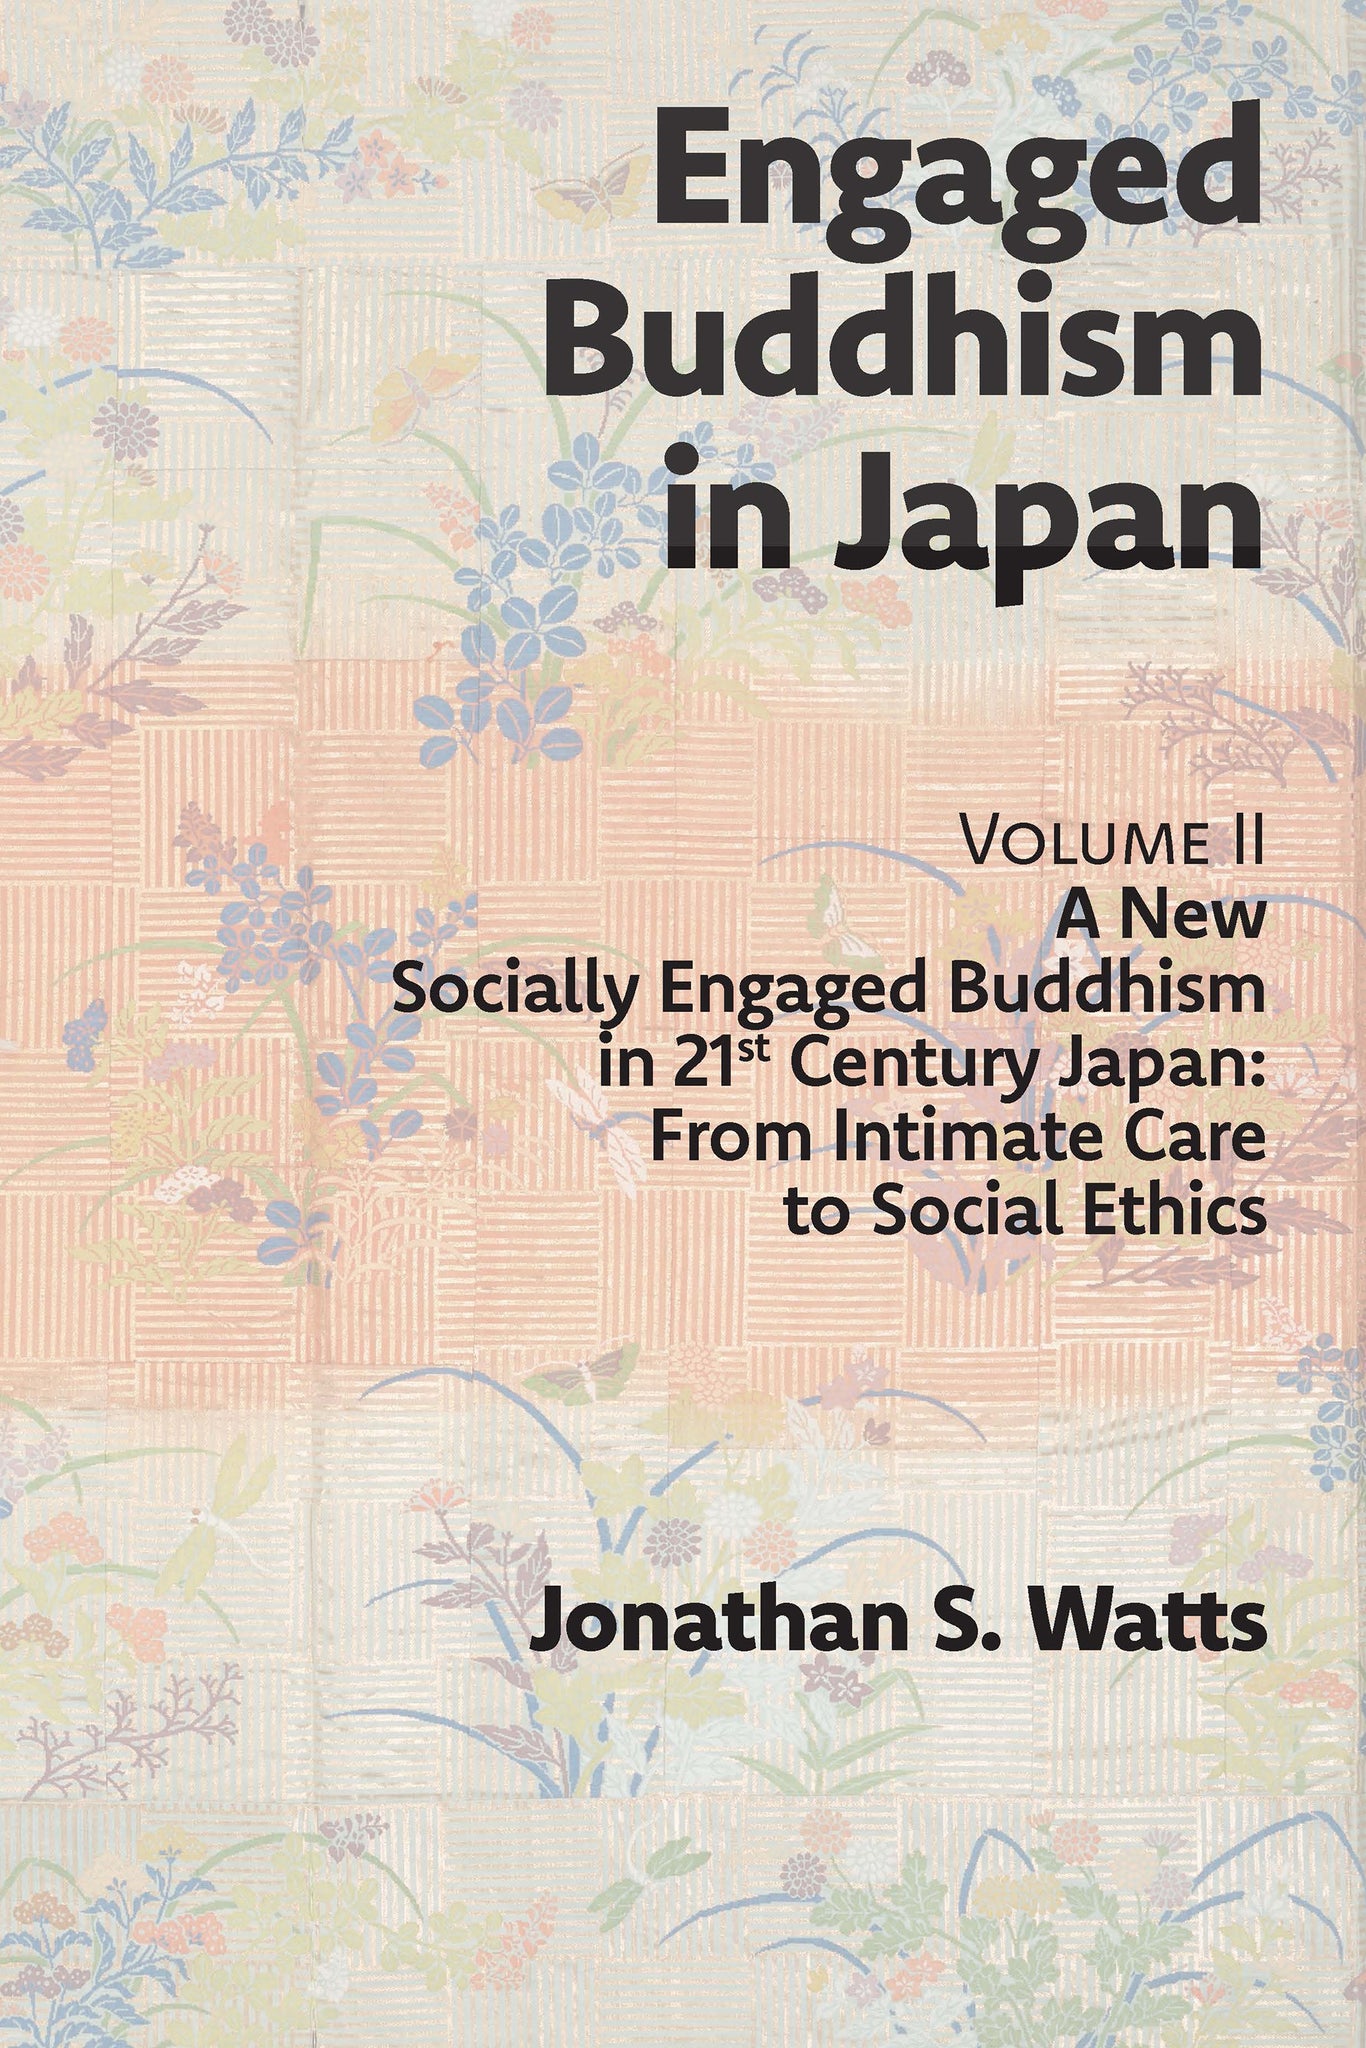 ENGAGED BUDDHISM IN JAPAN, volume II